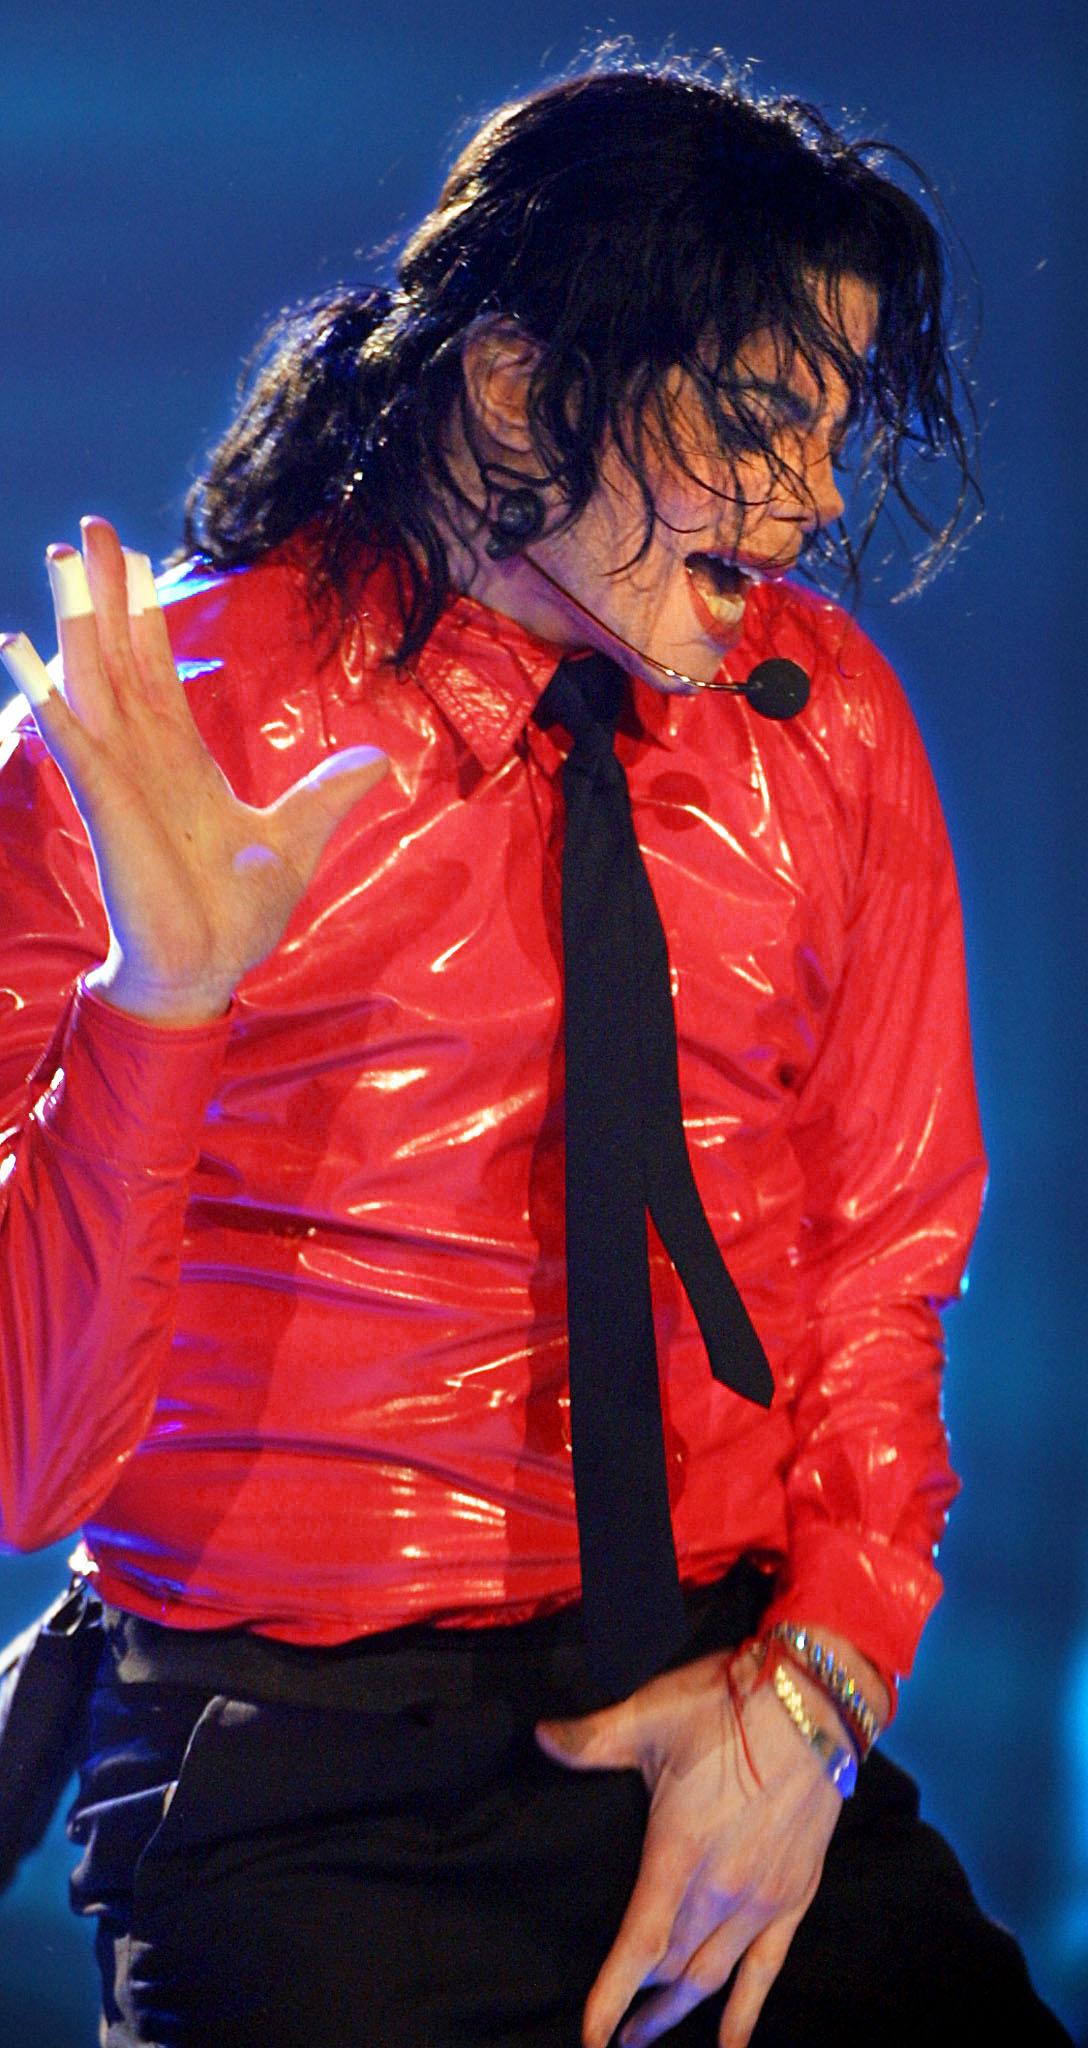 Michael Jackson performs on stage on April 20, 2002 in Pasadena, California | Source: Getty Images